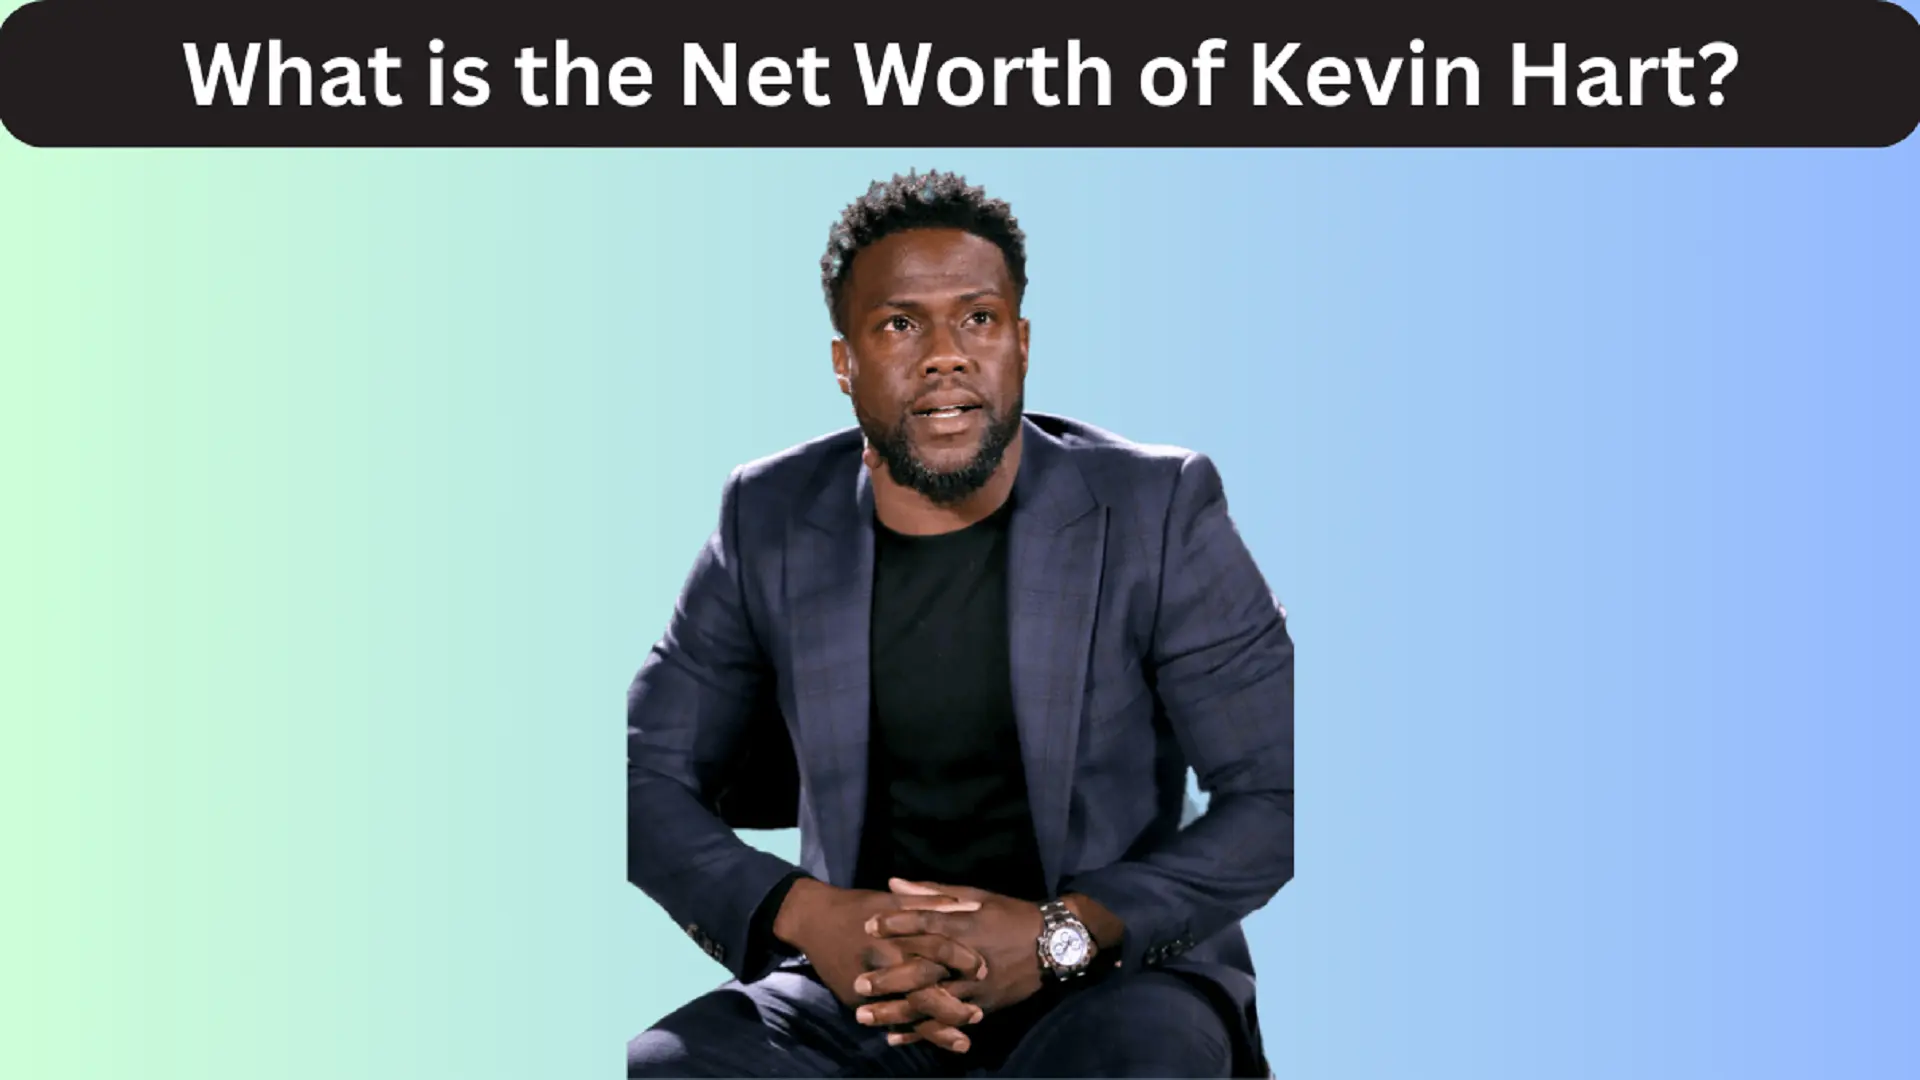 What is the Net Worth of Kevin Hart